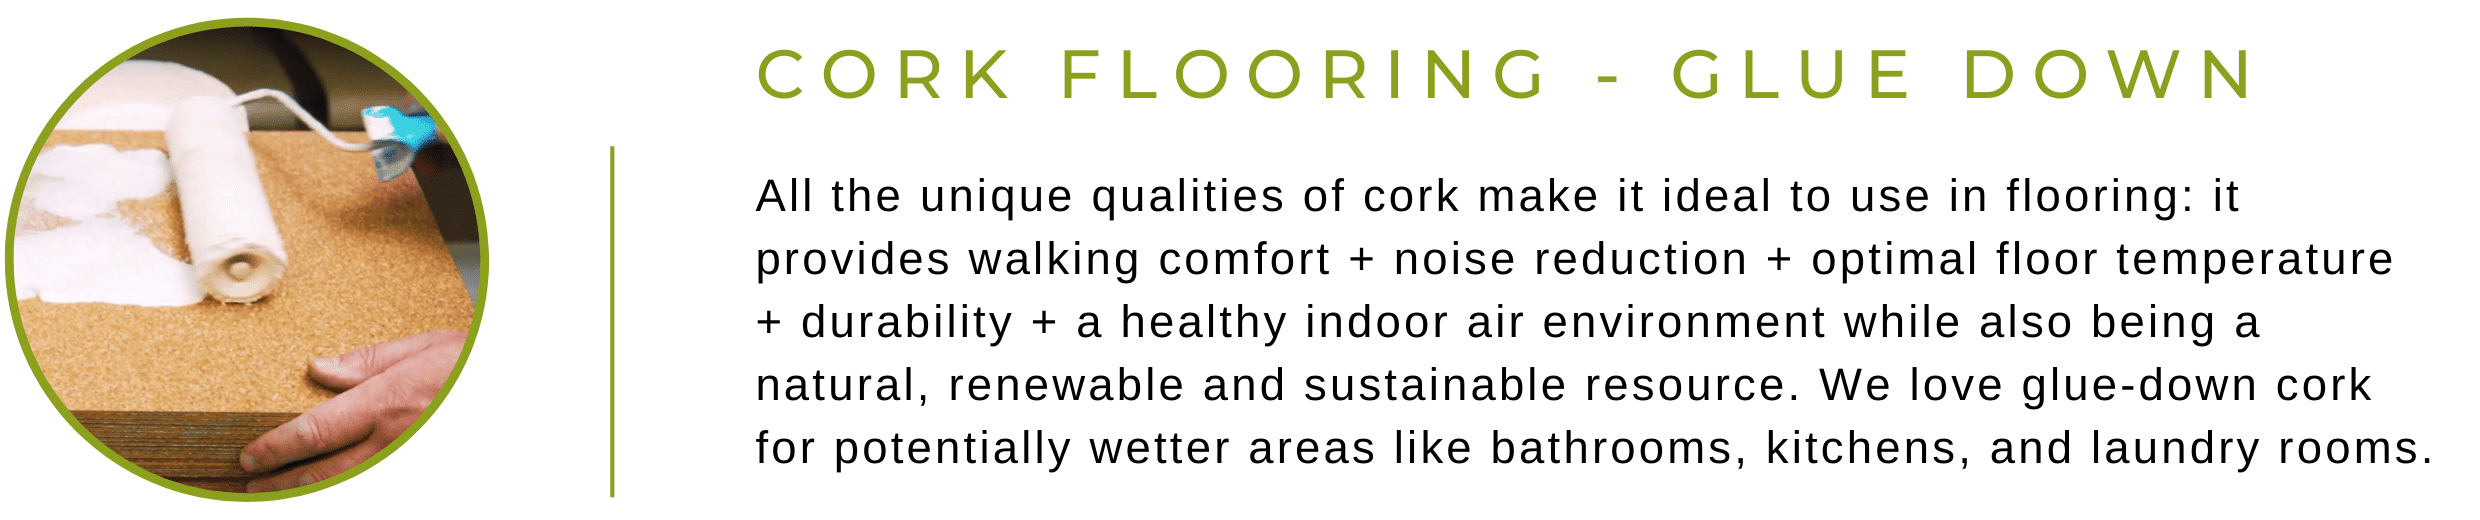 Glue-Down Cork Flooring: All the unique qualities of cork make it ideal to use in flooring: it provides walking comfort + noise reduction + optimal floor temperature + durability + a healthy indoor air environment while also being a natural, renewable and sustainable resource. We love glue-down cork for potentially wetter areas like bathrooms, kitchens, and laundry rooms